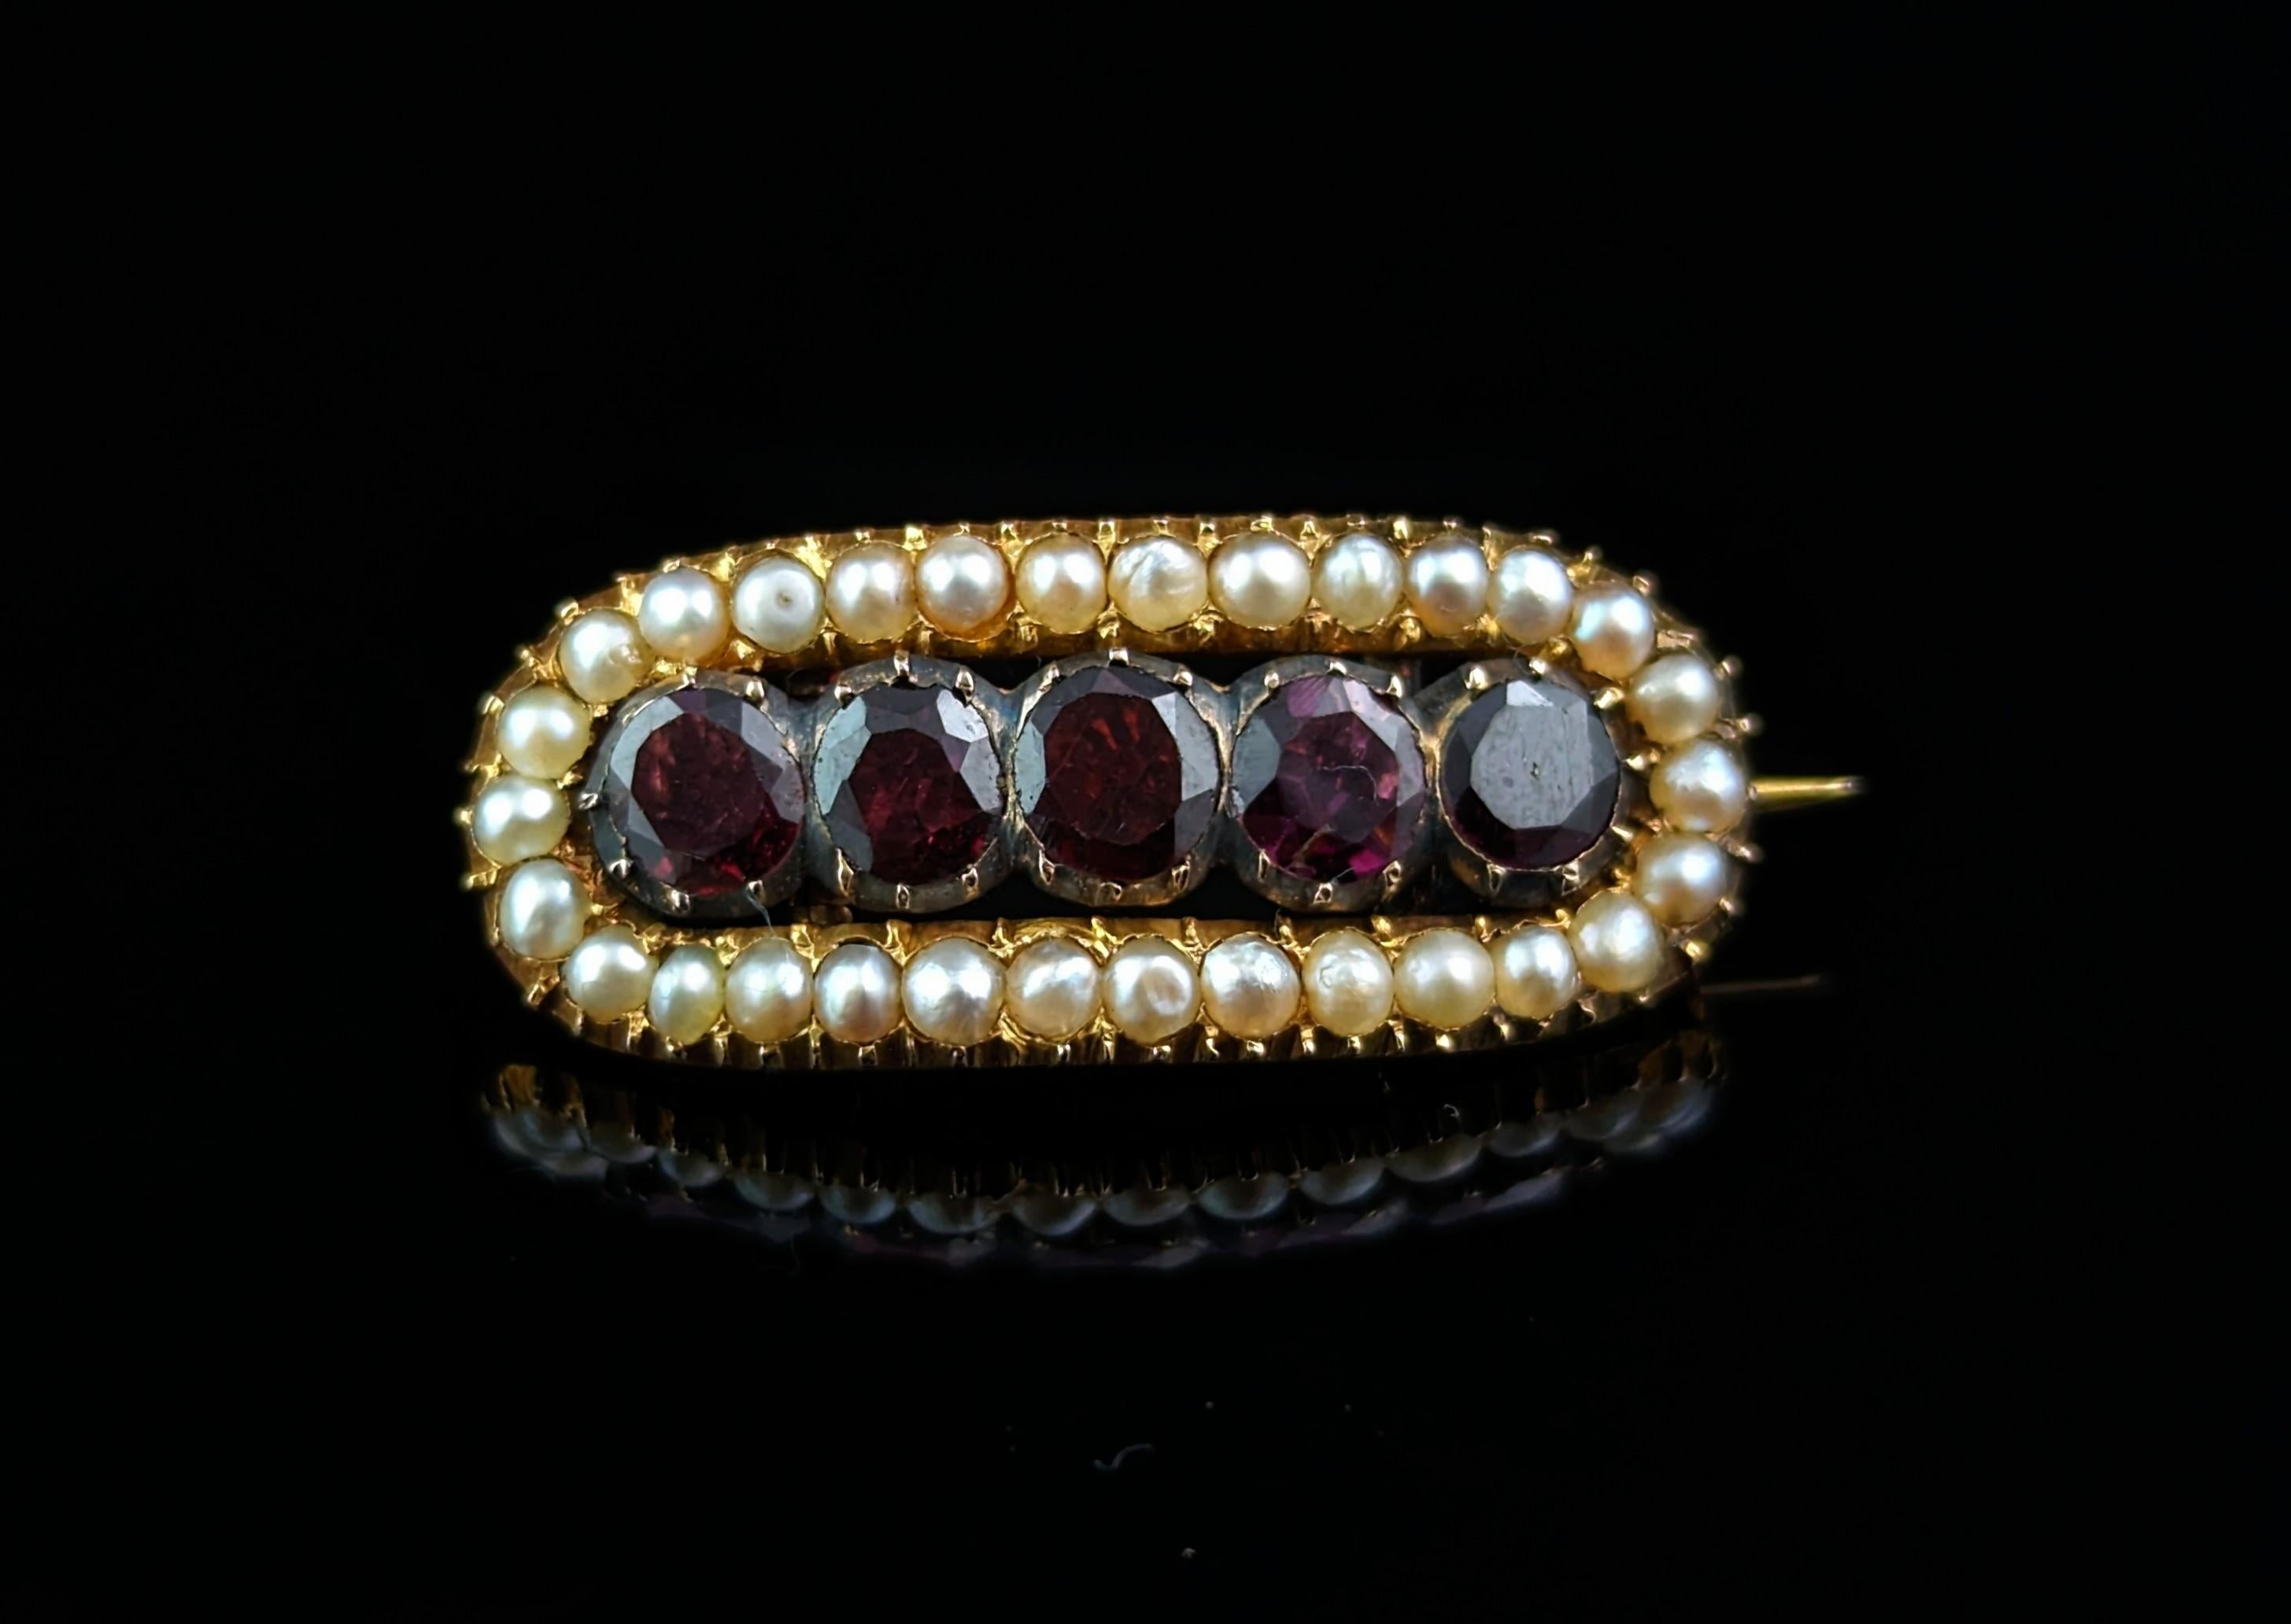 A very beautiful antique Georgian Garnet and Pearl brooch.

This is an elongated oval shaped brooch, perfect for securing a fichu or lace ruffle at the neck.

It is crafted in rich 18ct yellow gold and set with a row of deep rich red, flat cut